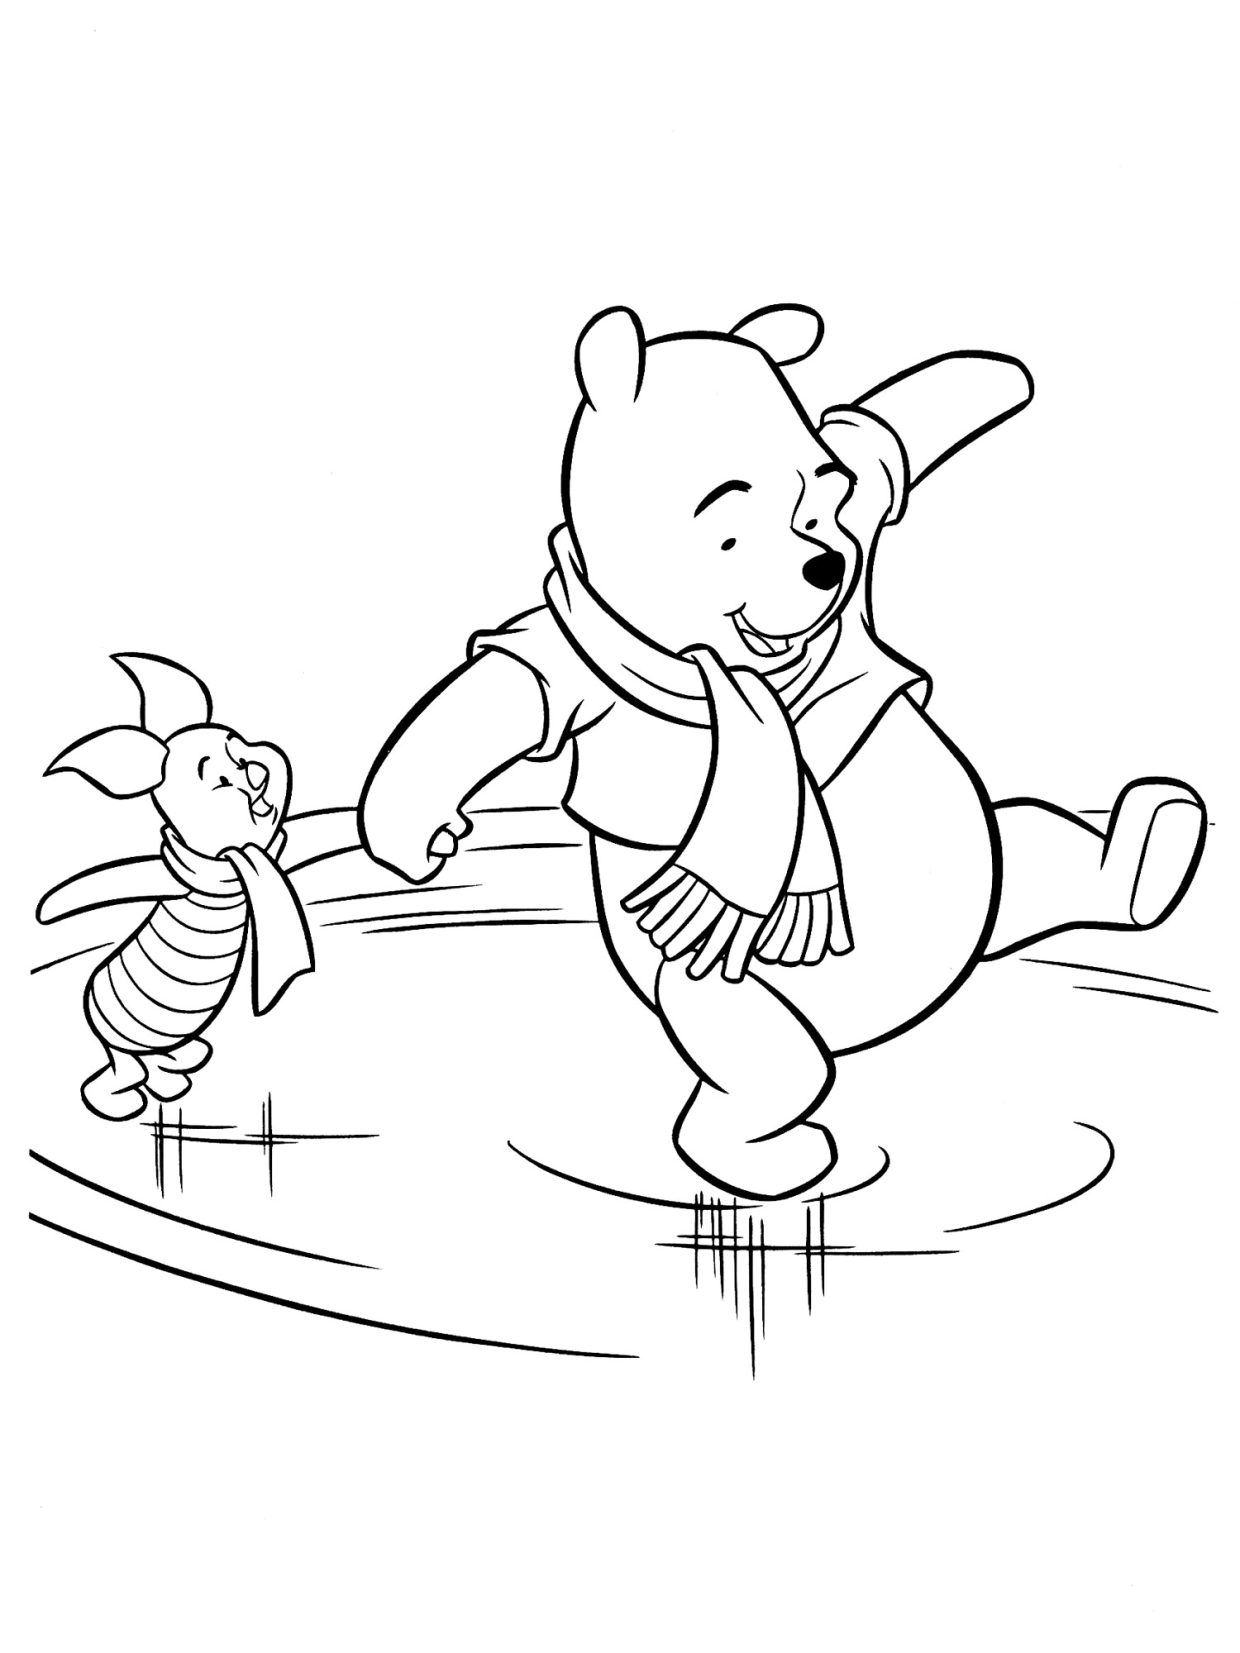 Fun of winnie the pooh coloring pages for kids